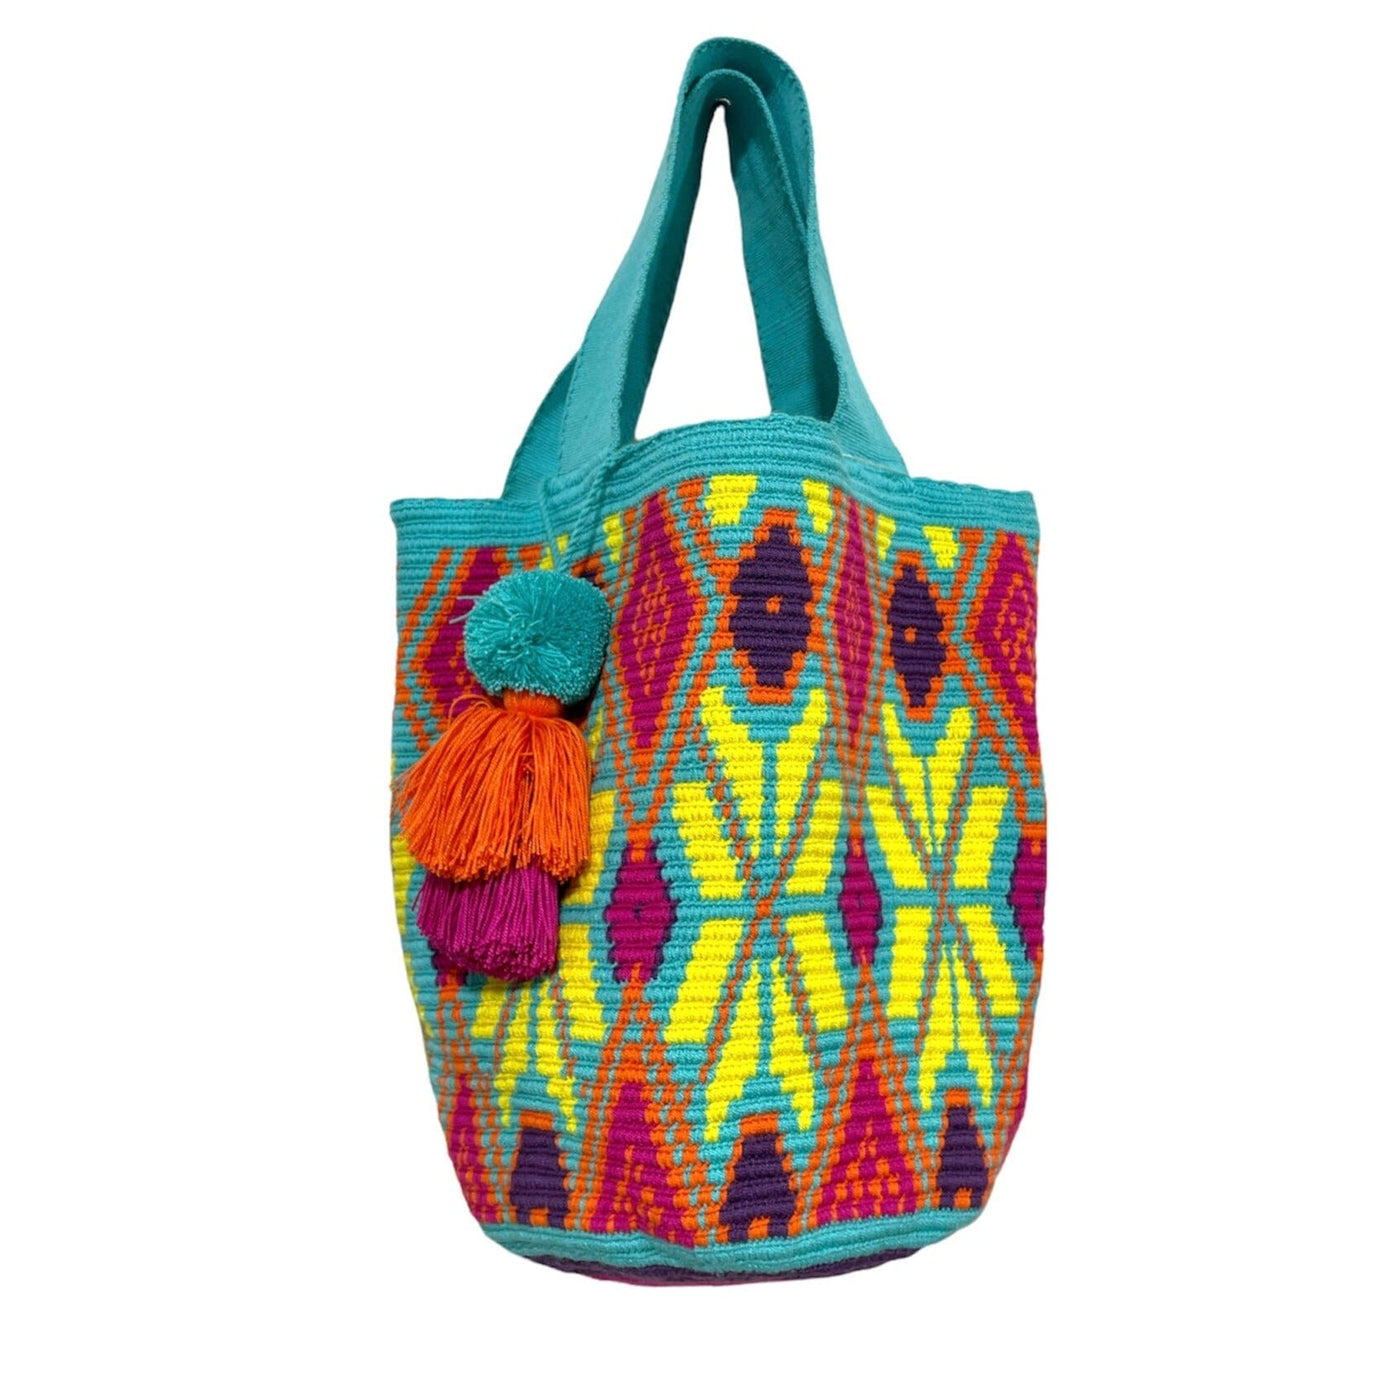 Summer Maxi Tote Bags | Extra Large Beach Tote BEACH BAG - CROCHET TOTE BAG Turquoise | Summer Solstice 